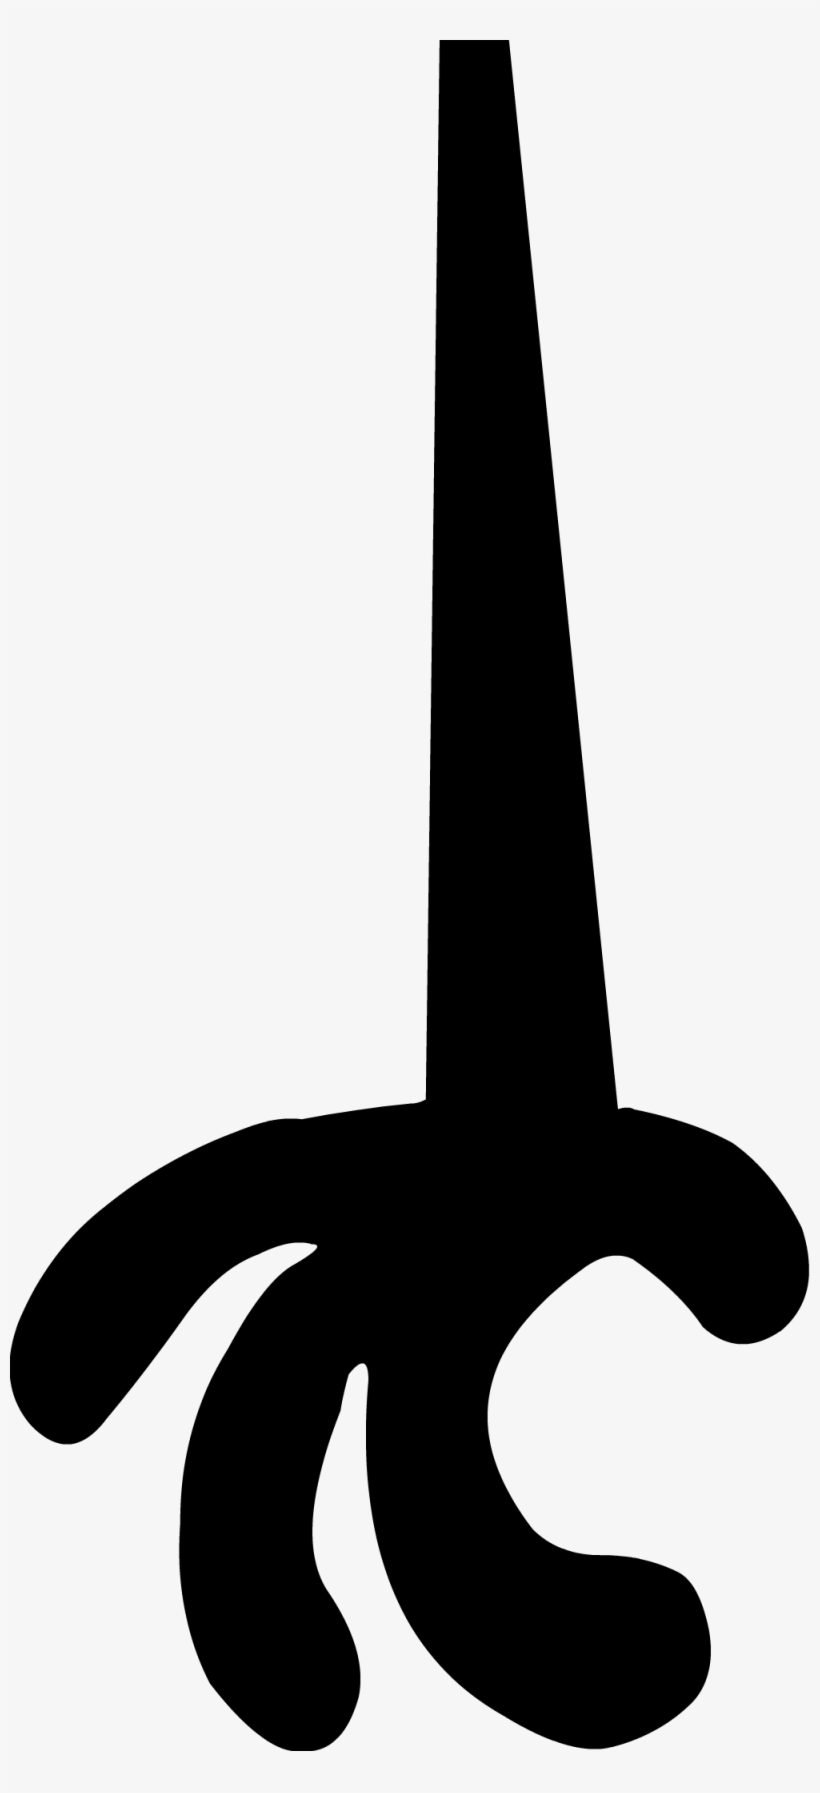 Freaked Out Arm - Bfdi Bent Arm, transparent png #5260644